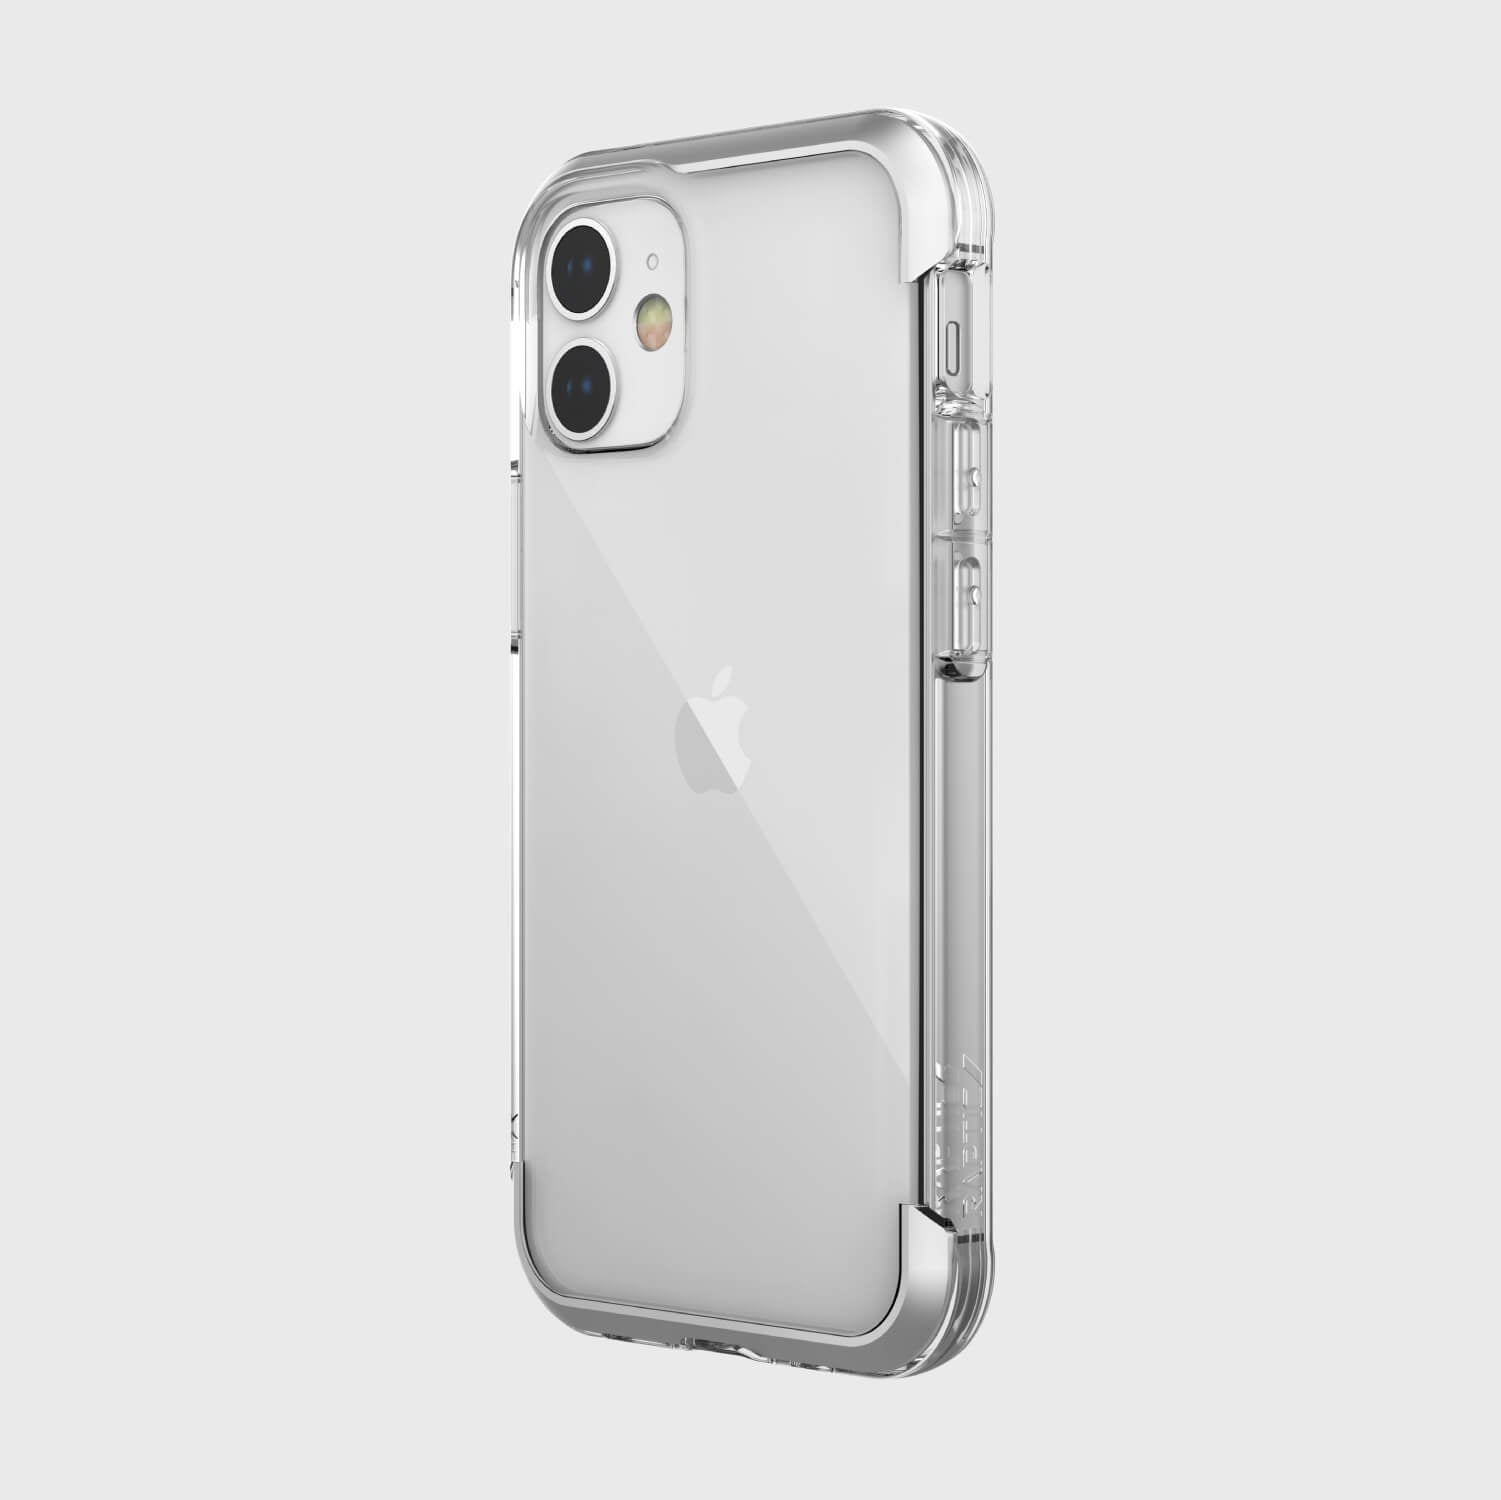 Showing a iPhone 12 Mini in a clear Raptic air case